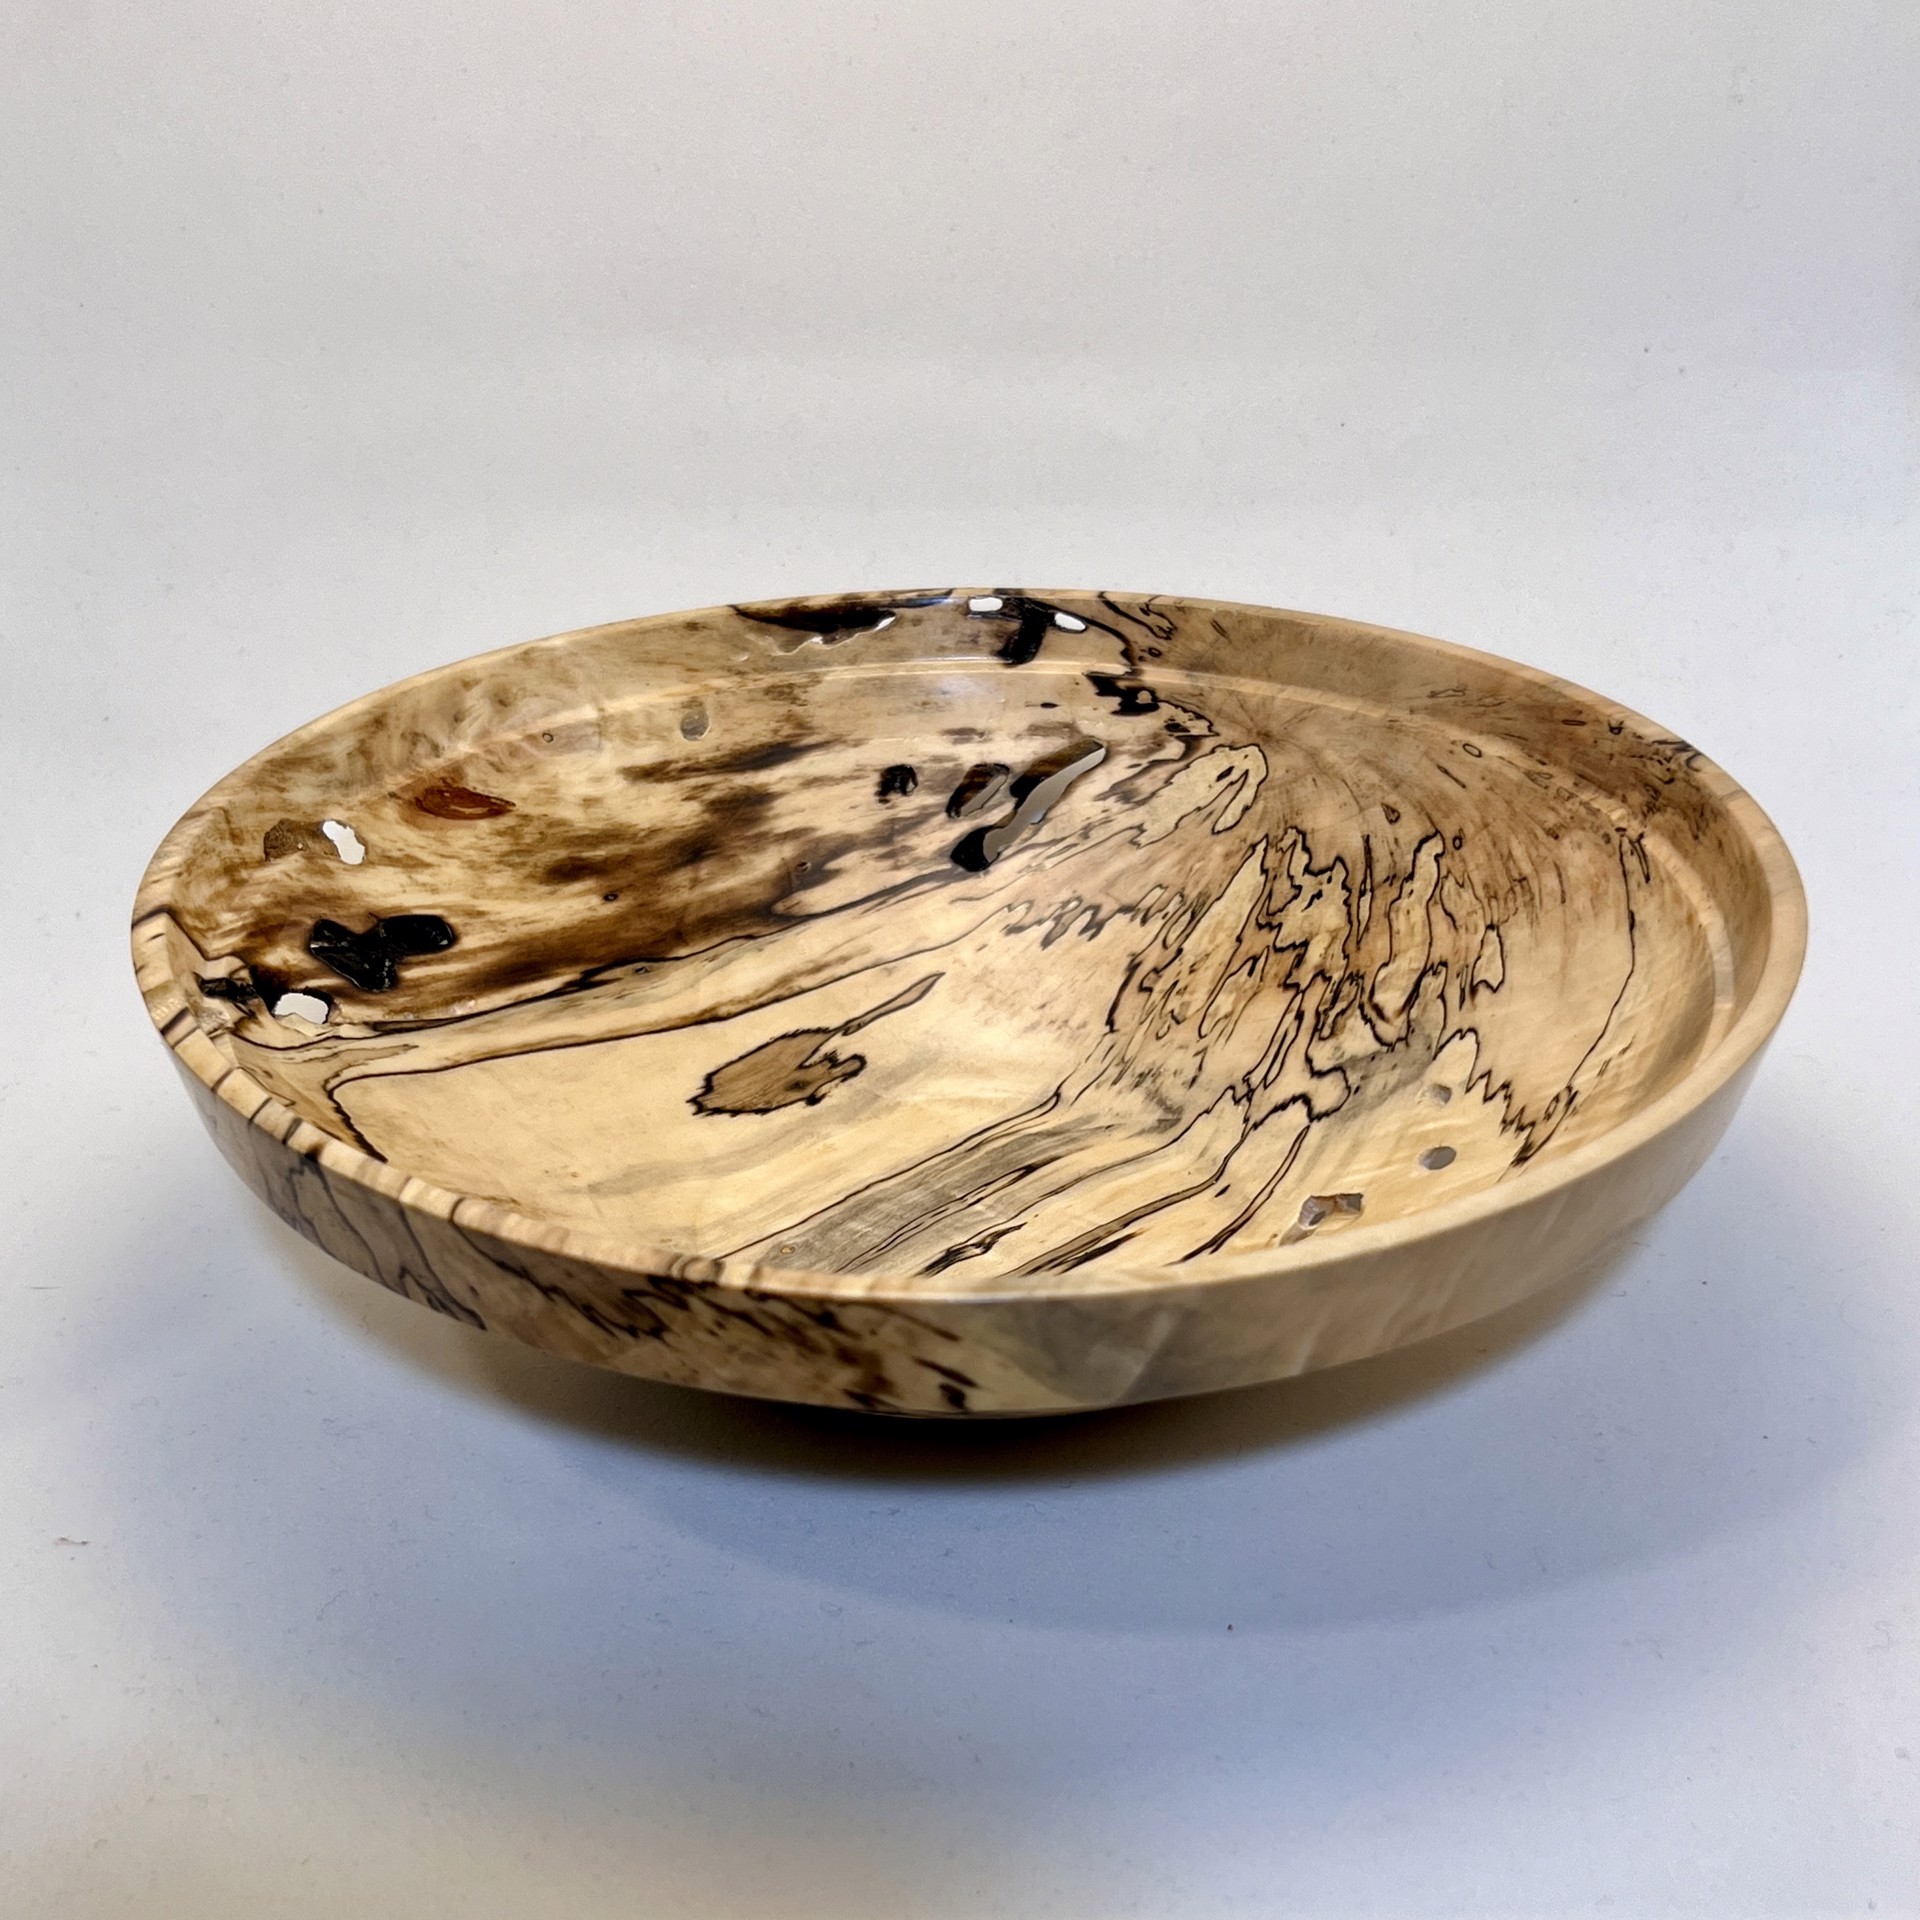 34. Curly Leaf Willow Bowl by Don Kaiser